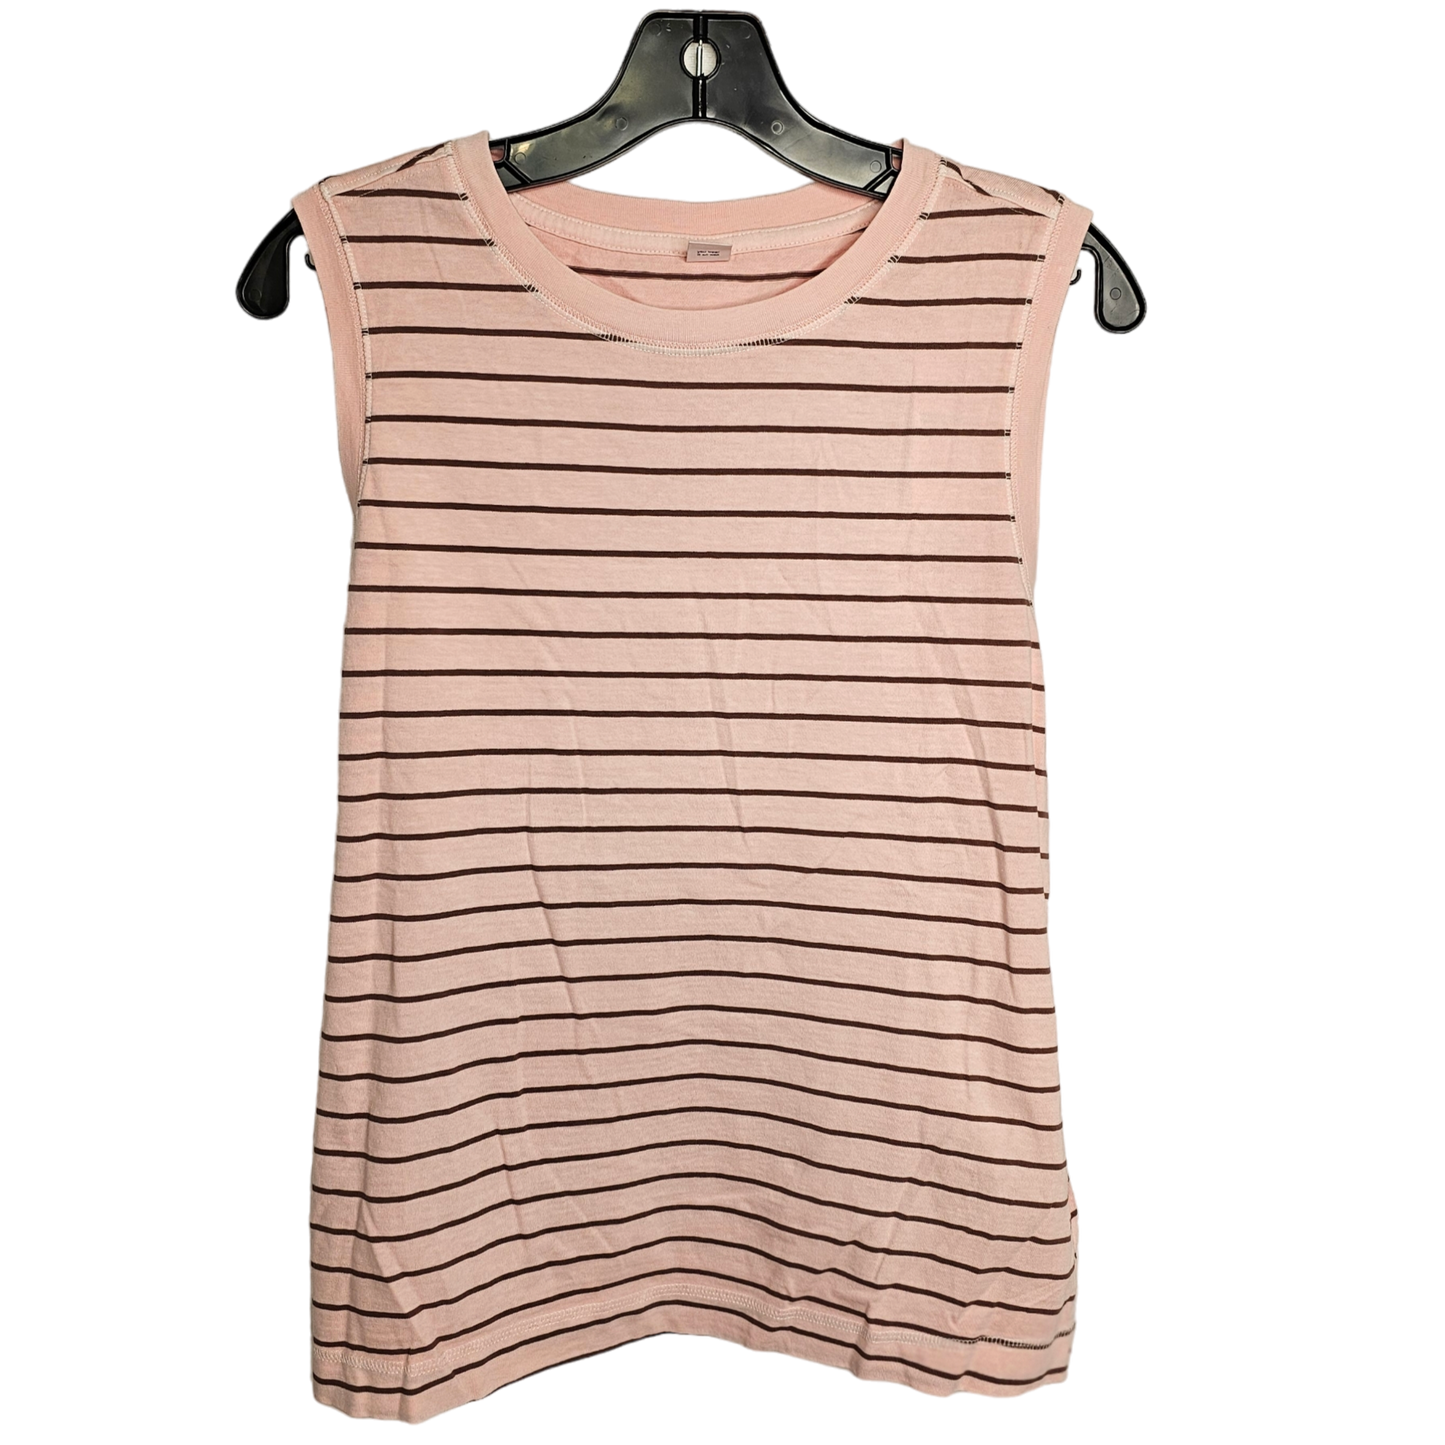 Top Sleeveless By Old Navy  Size: S TALL